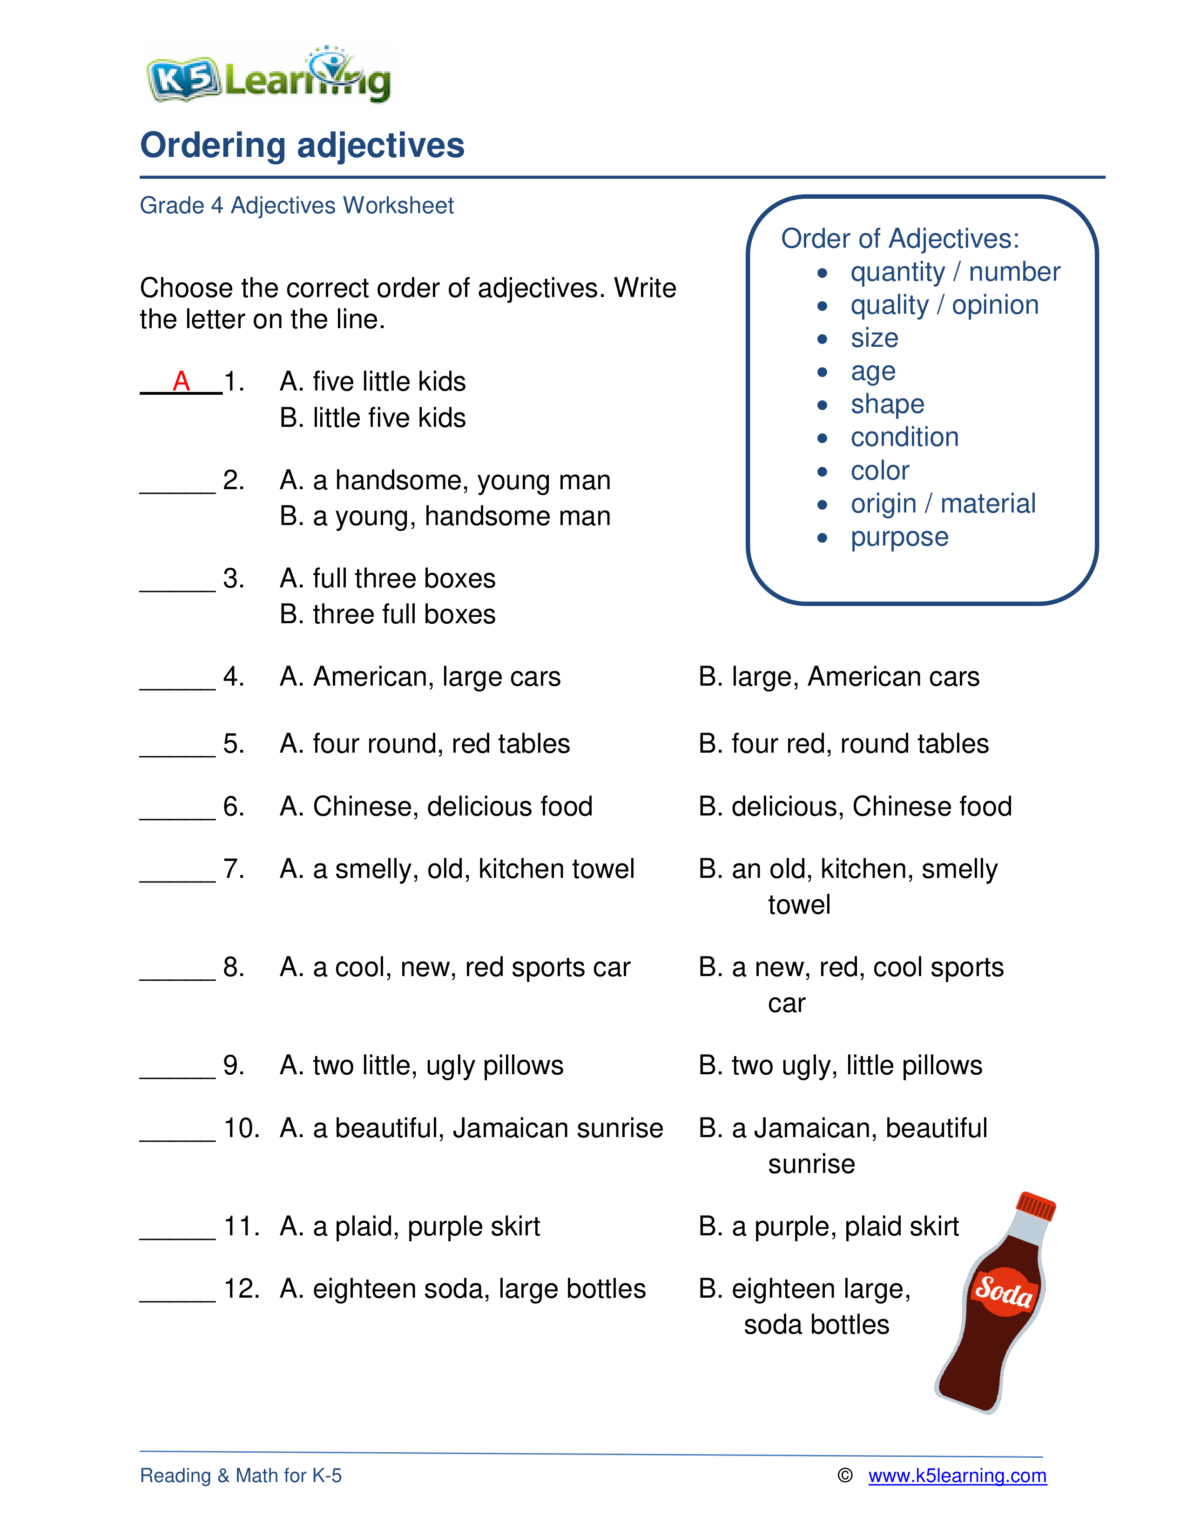 adverbs-of-intensity-worksheets-with-answers-adverbworksheets